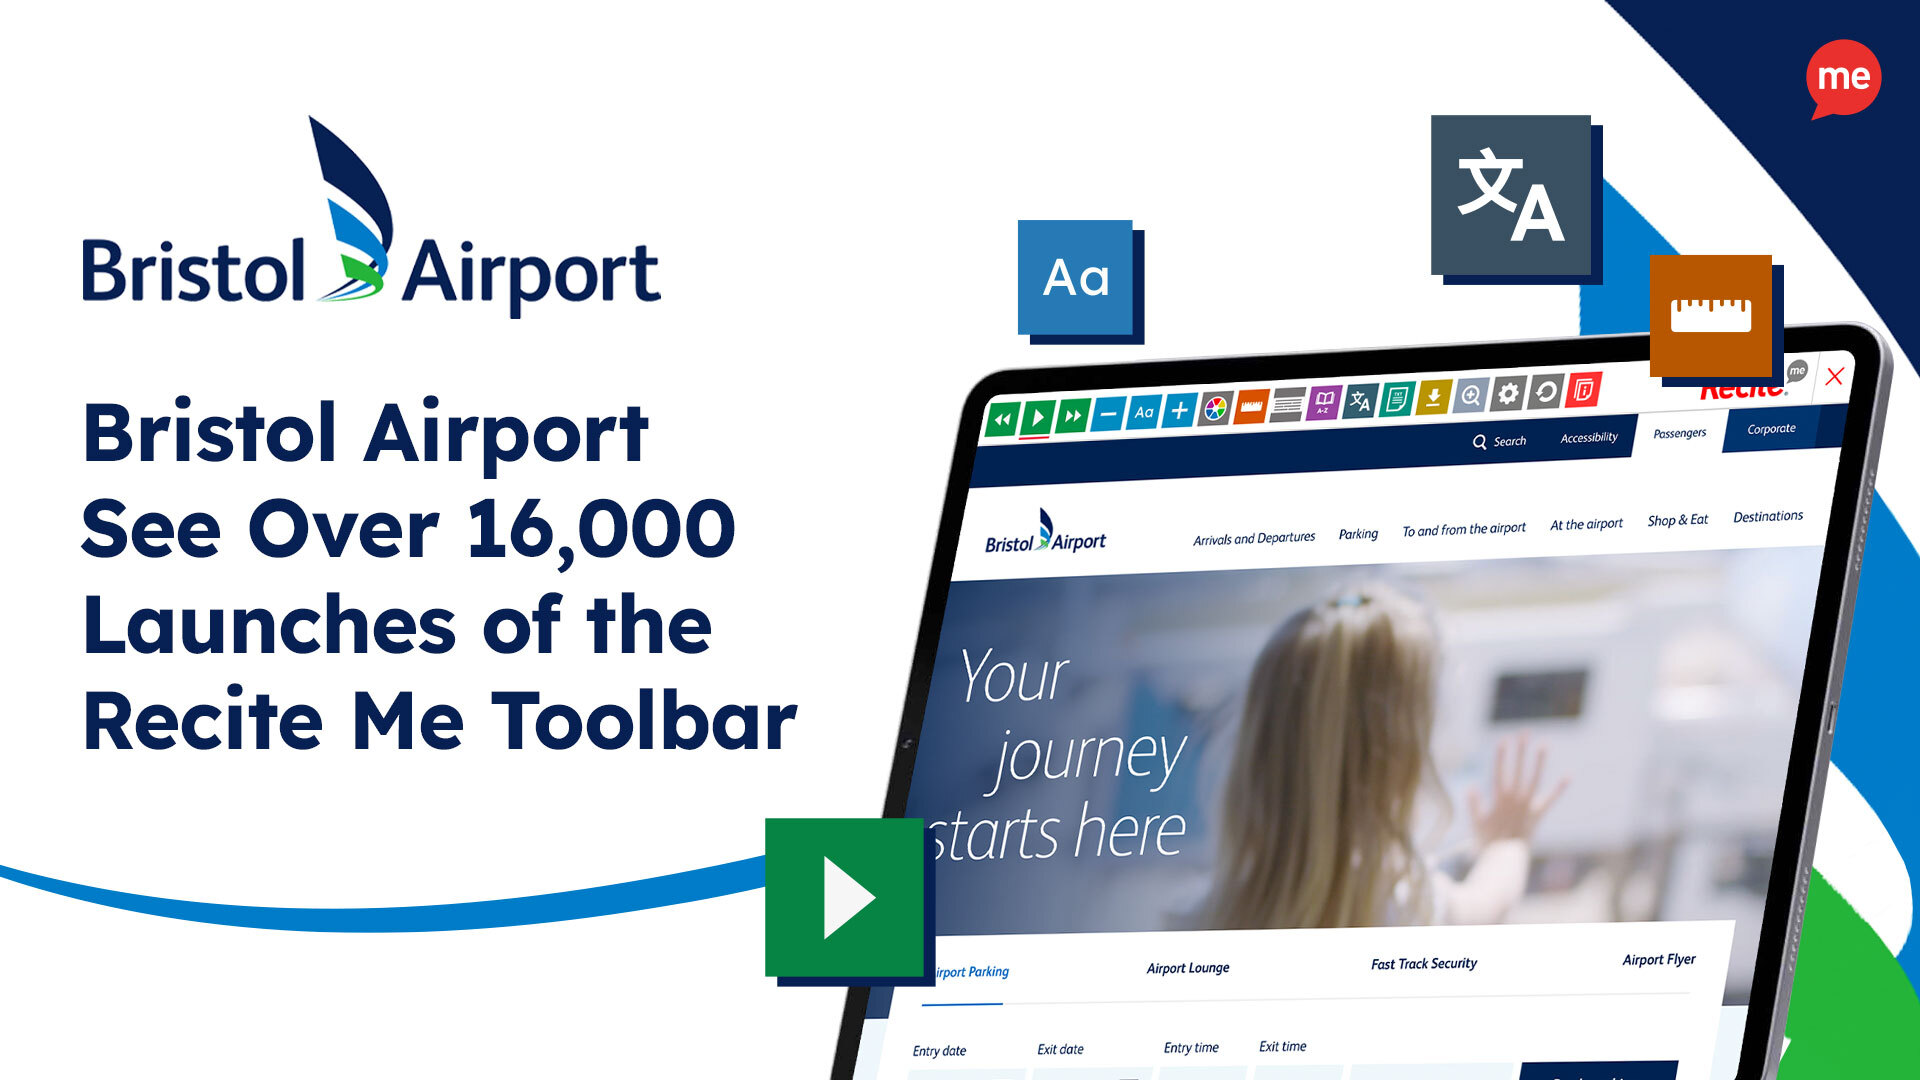 Bristol Airport See Over 16,000 Launches of the Recite Me Toolbar. MOck-up of the Recite Me toolbar being used on the Bristol Airport website